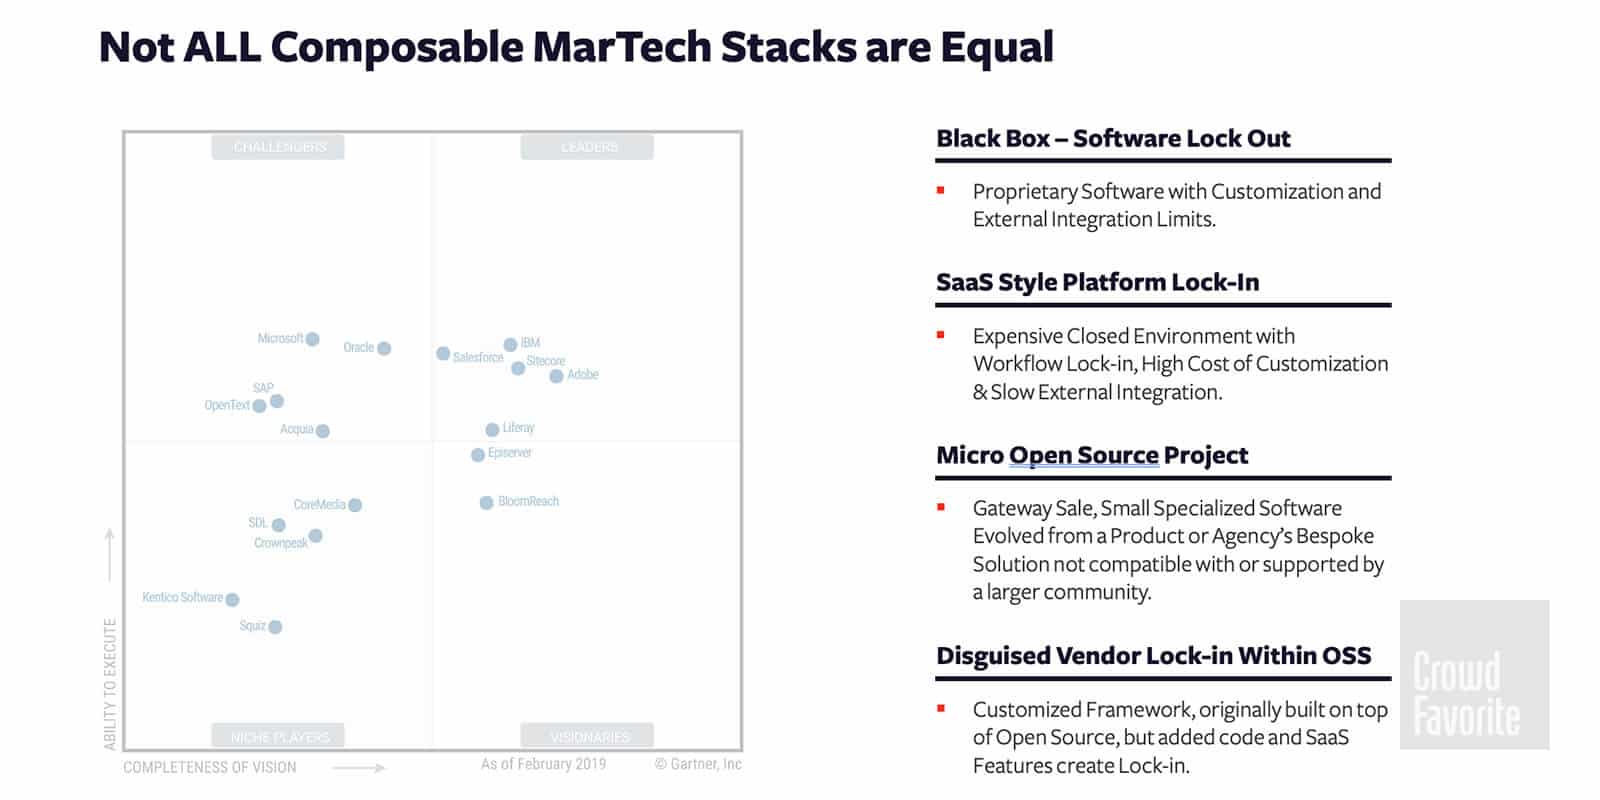 Not all Composable MarTech Stacks are Equal